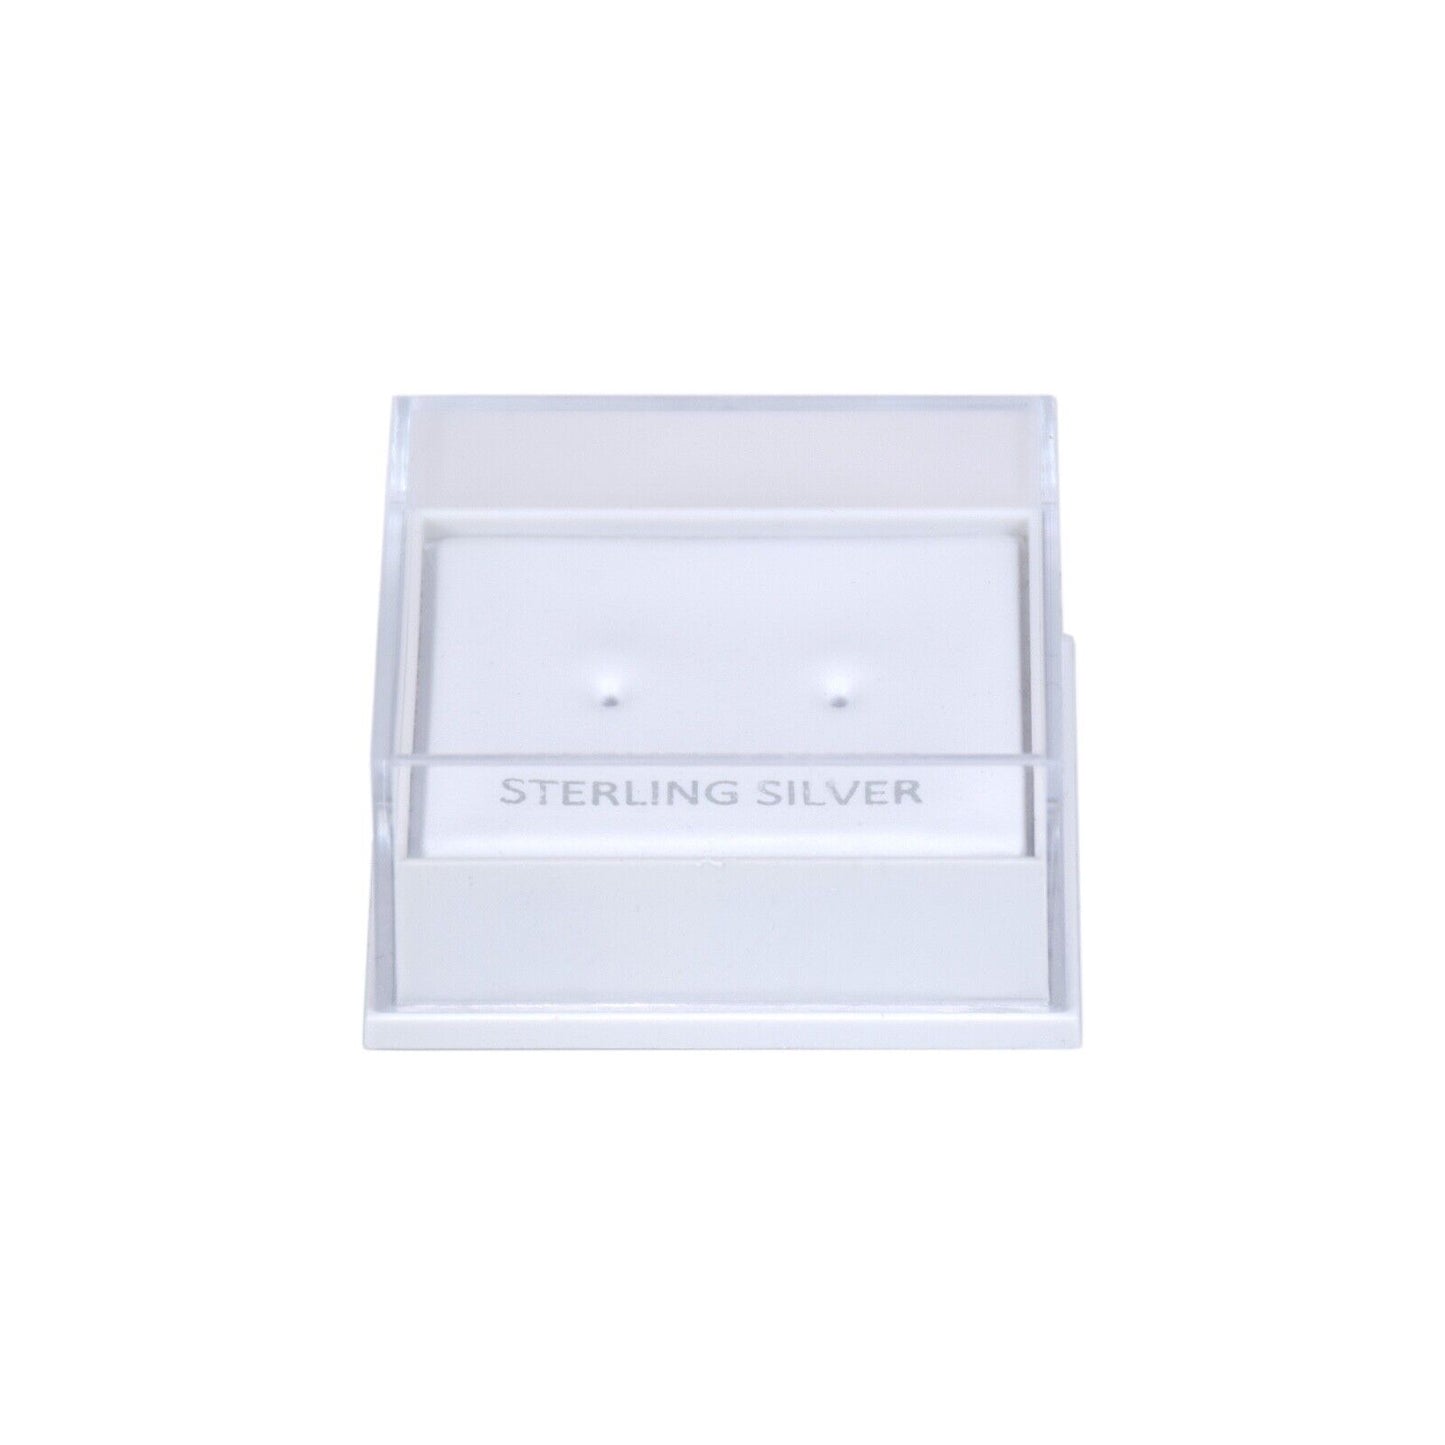 20x Clear Lid Earring Display Boxes Sterling Silver Embossed 41 x 35 x 21 mm